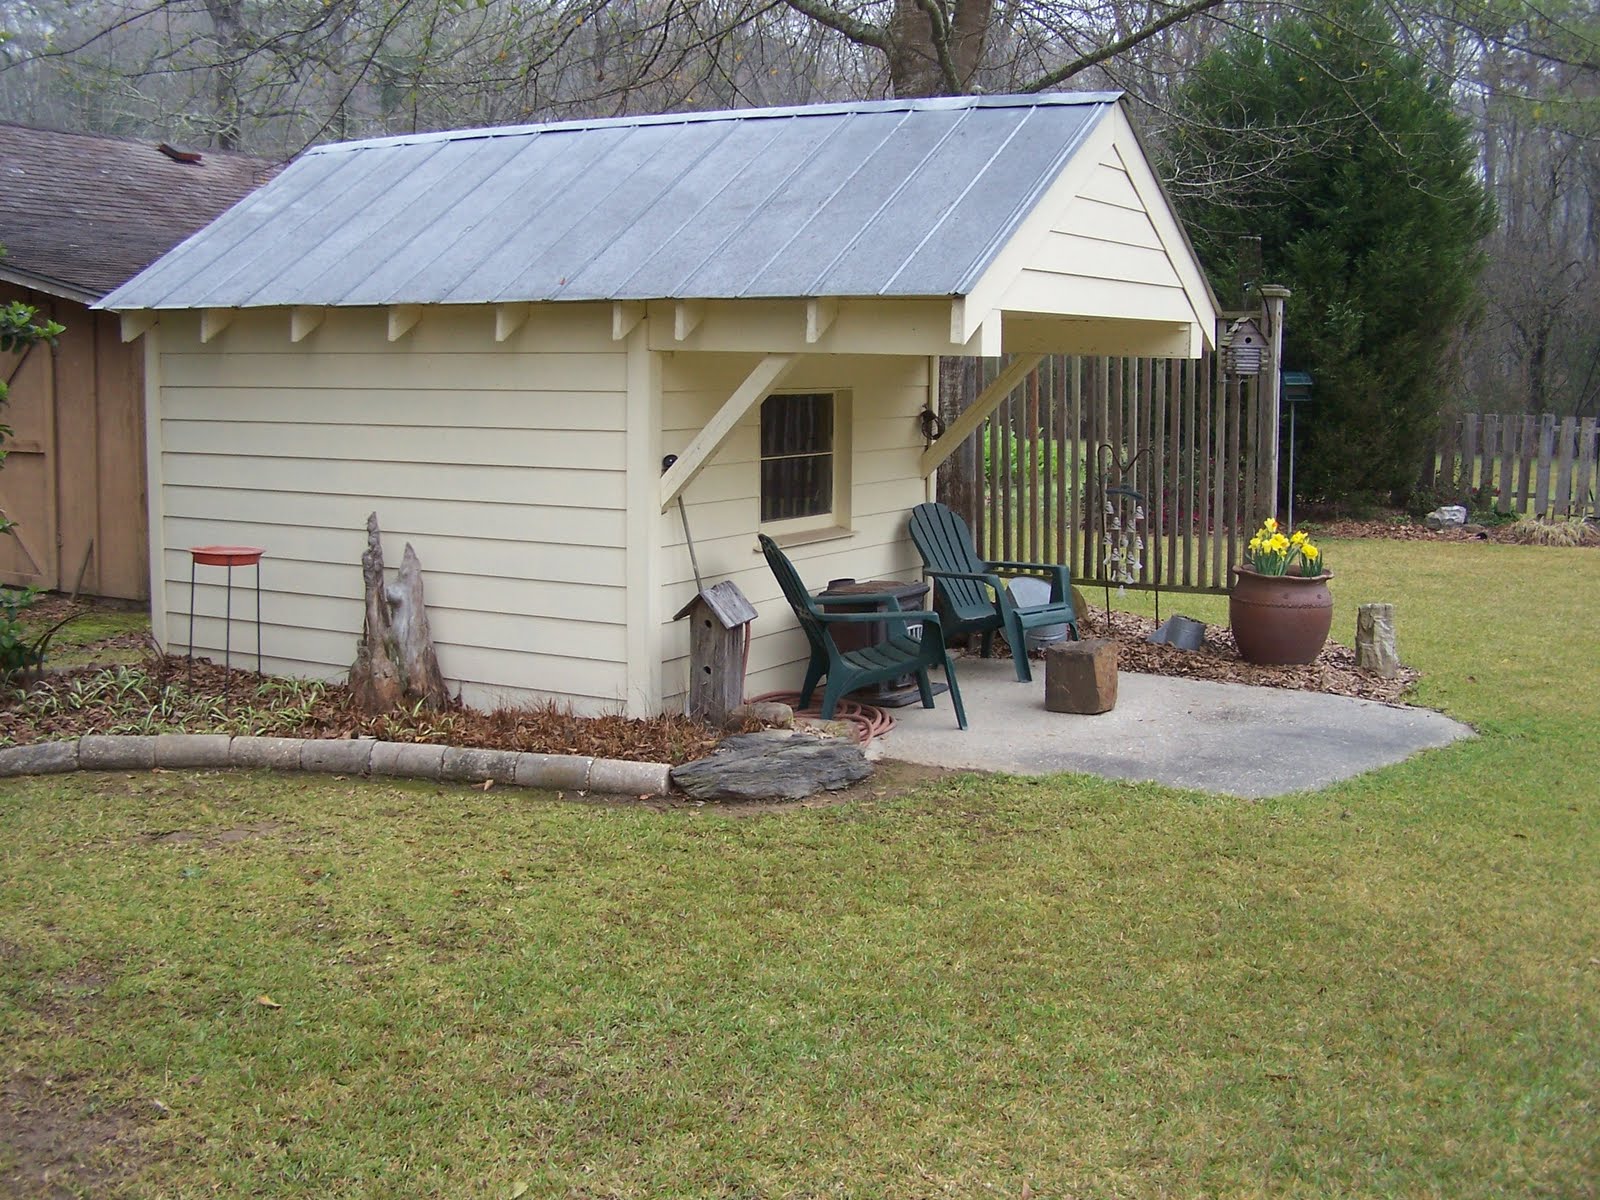 Storage Shed Landscaping Ideas